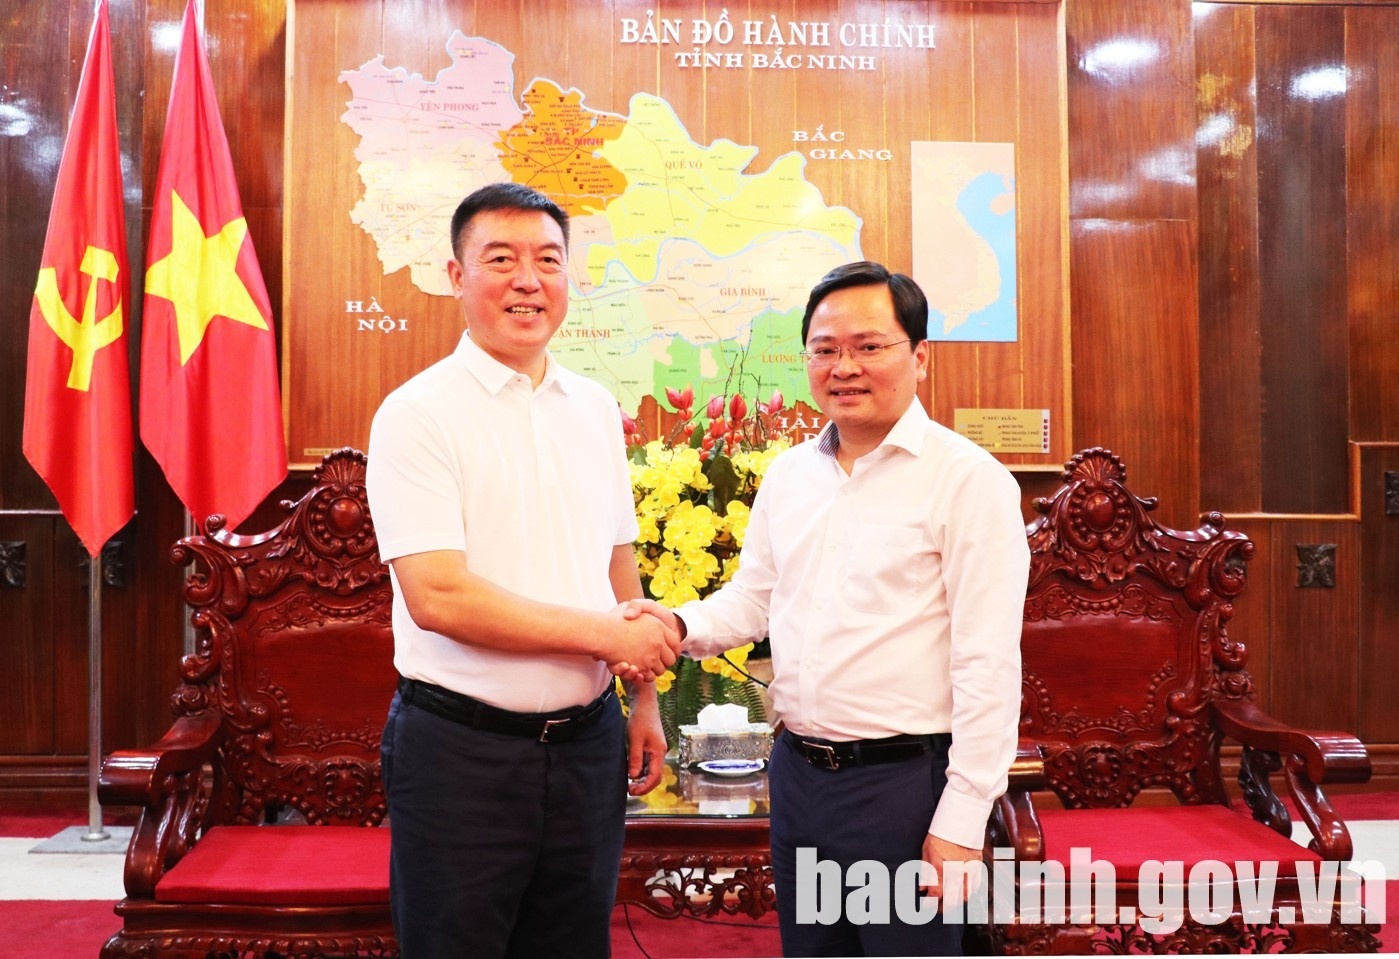 Victory Giant Technology to develop $400 million electronics components factory in Bac Ninh